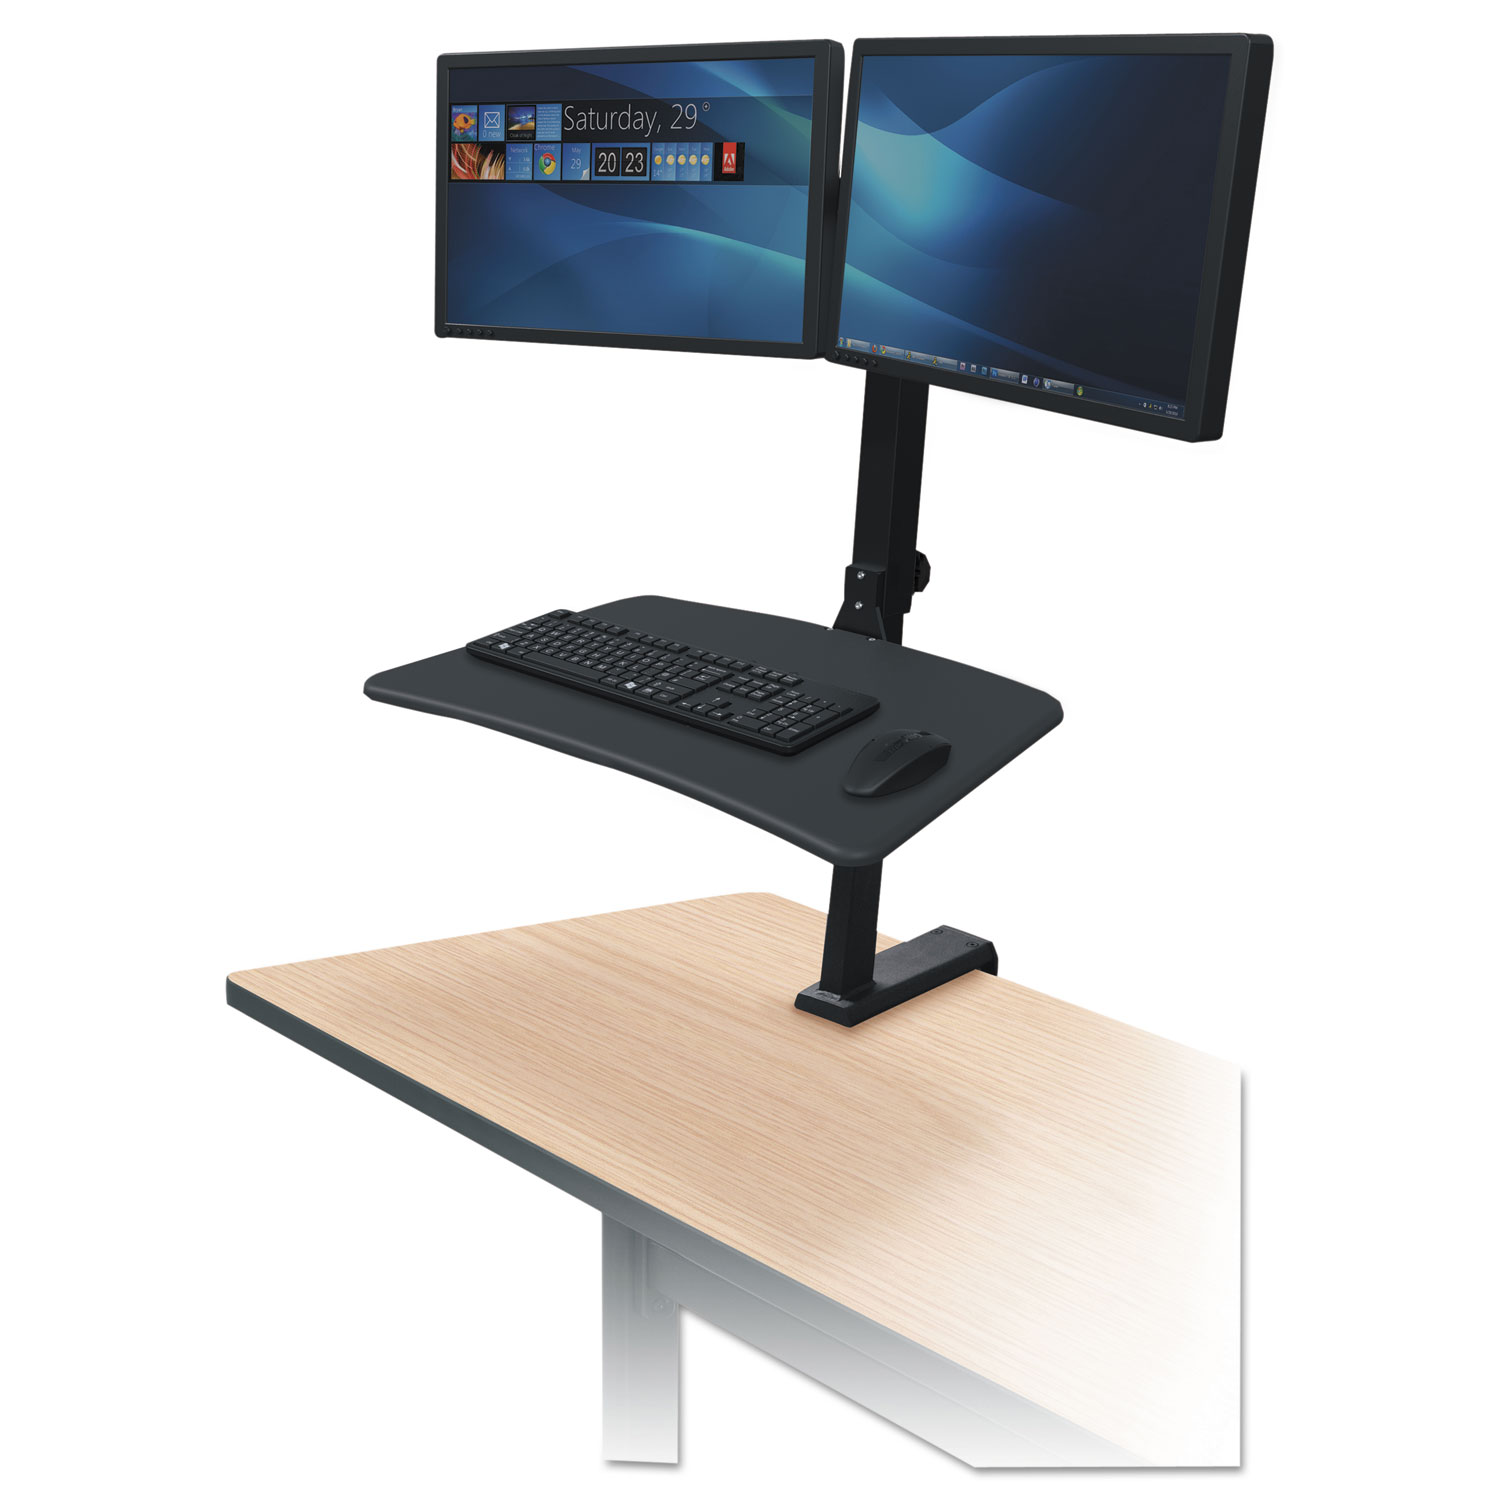 Up-Rite Rear Mounted Sit-Stand Workstation, Double, 27 5/8 x 30 x 42, Black